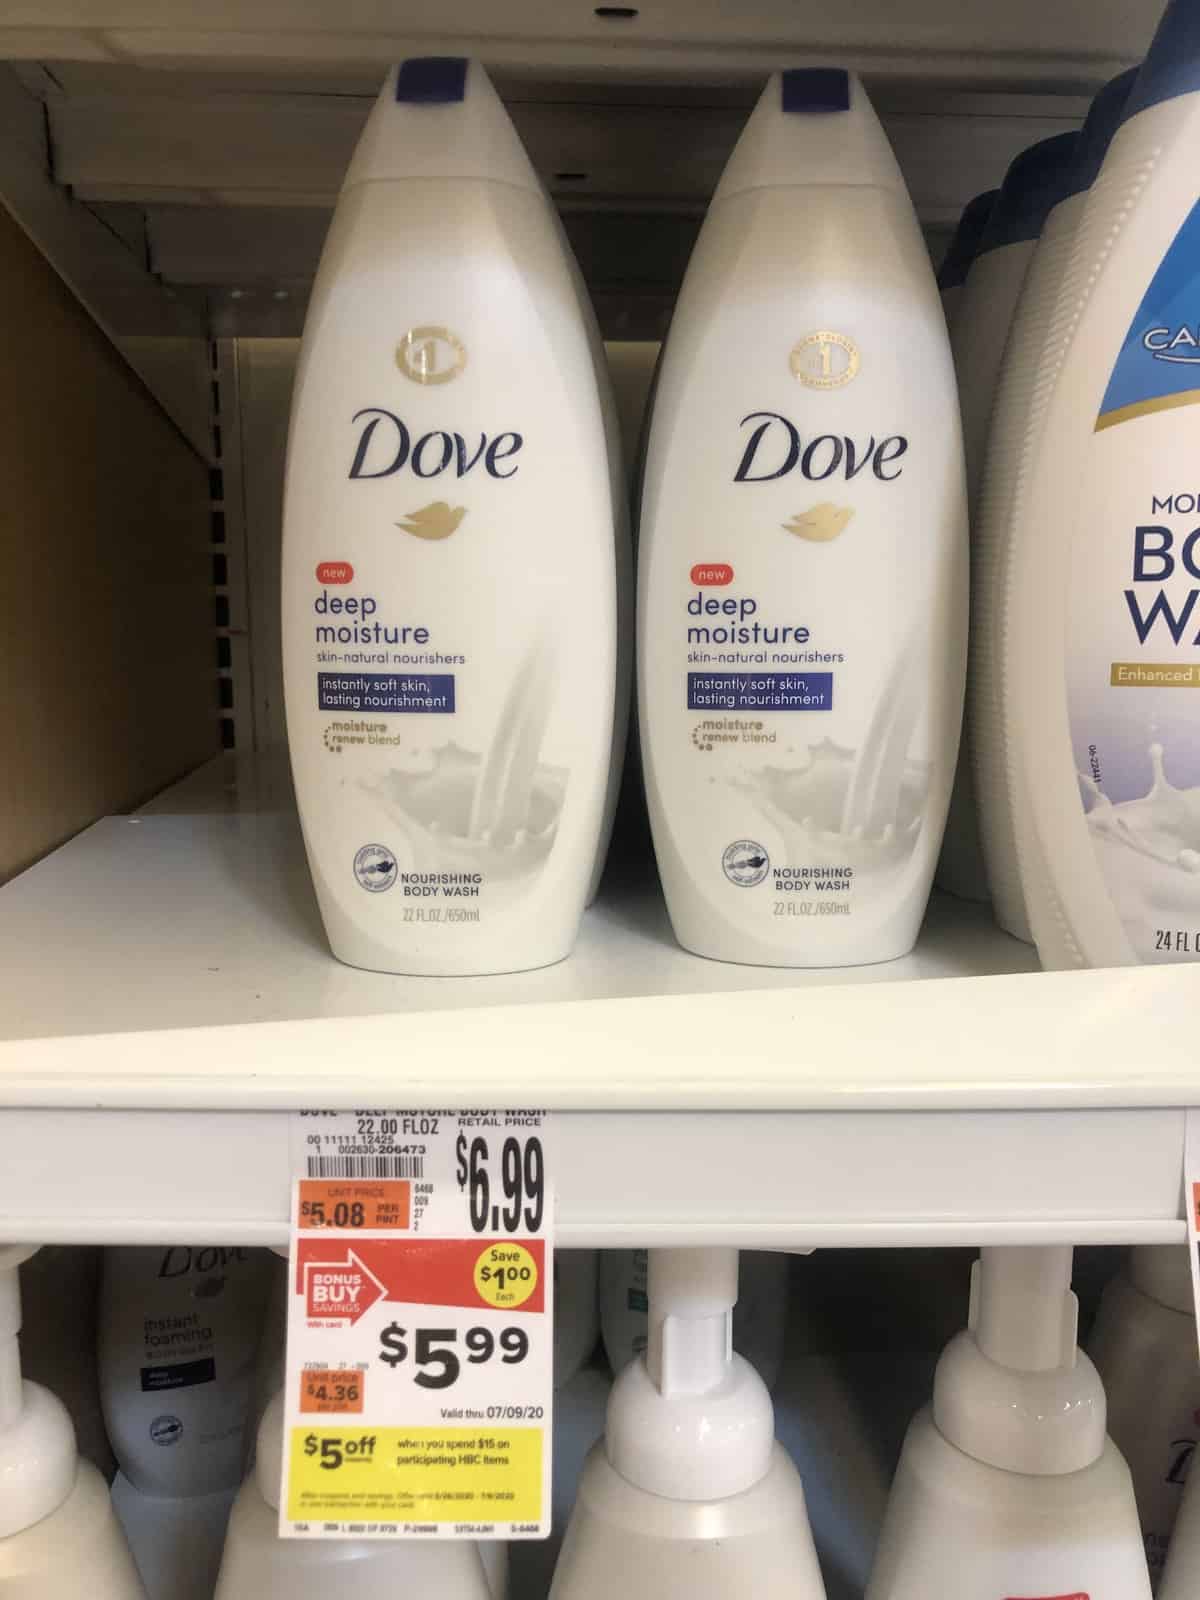 Giant: Dove Body Wash Products JUST $1.75 Each Thru 7/2!